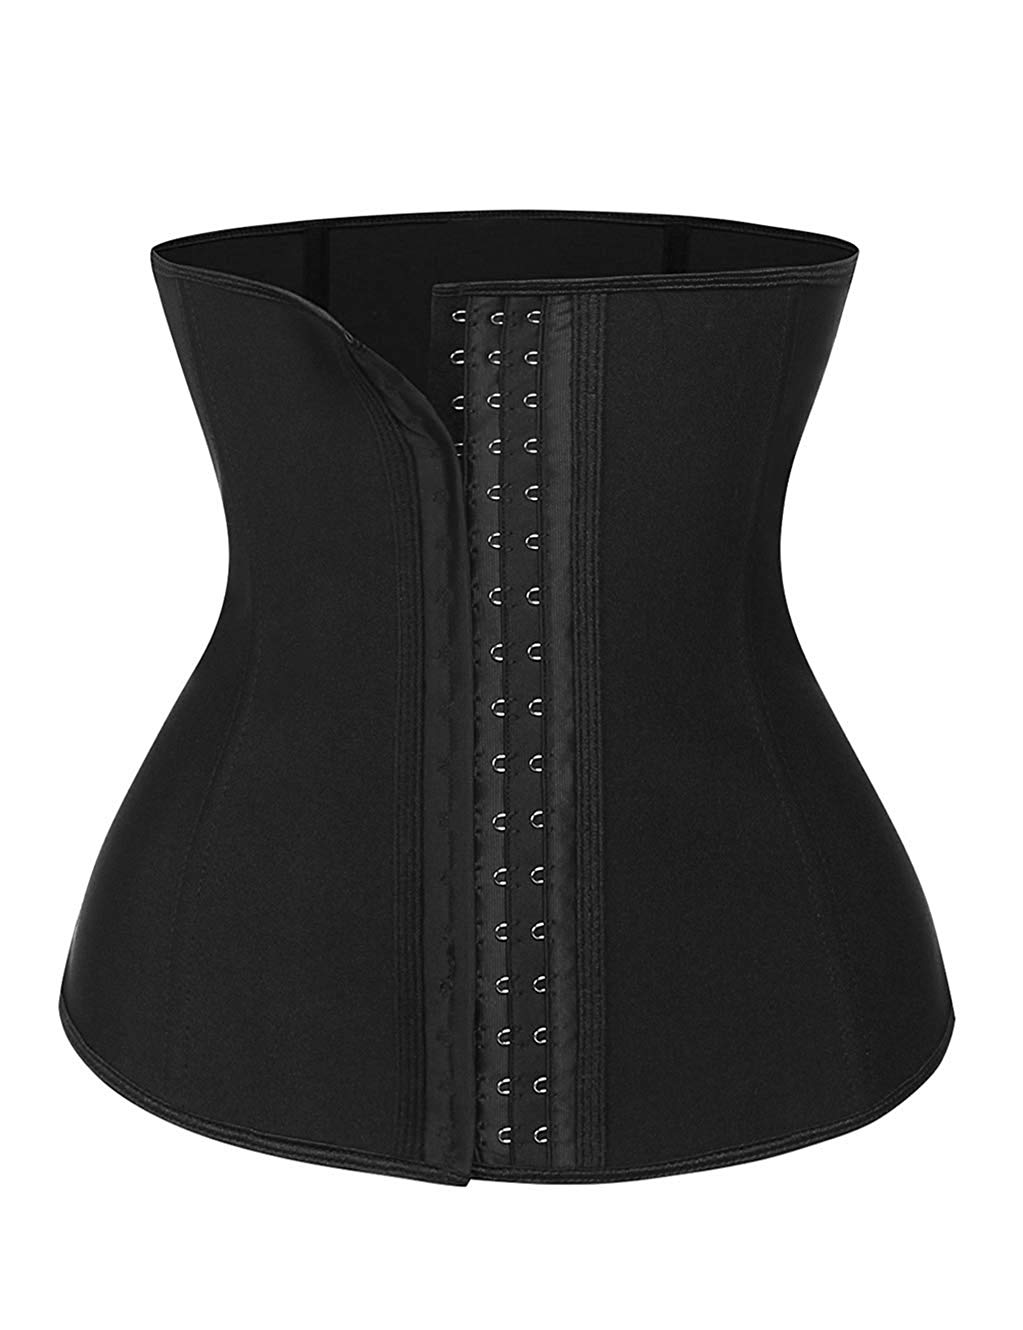 Womens Waist Trainer Corset for Weight Loss Steel Boned Tummy Control Body Shaper with Adjustable Hooks 